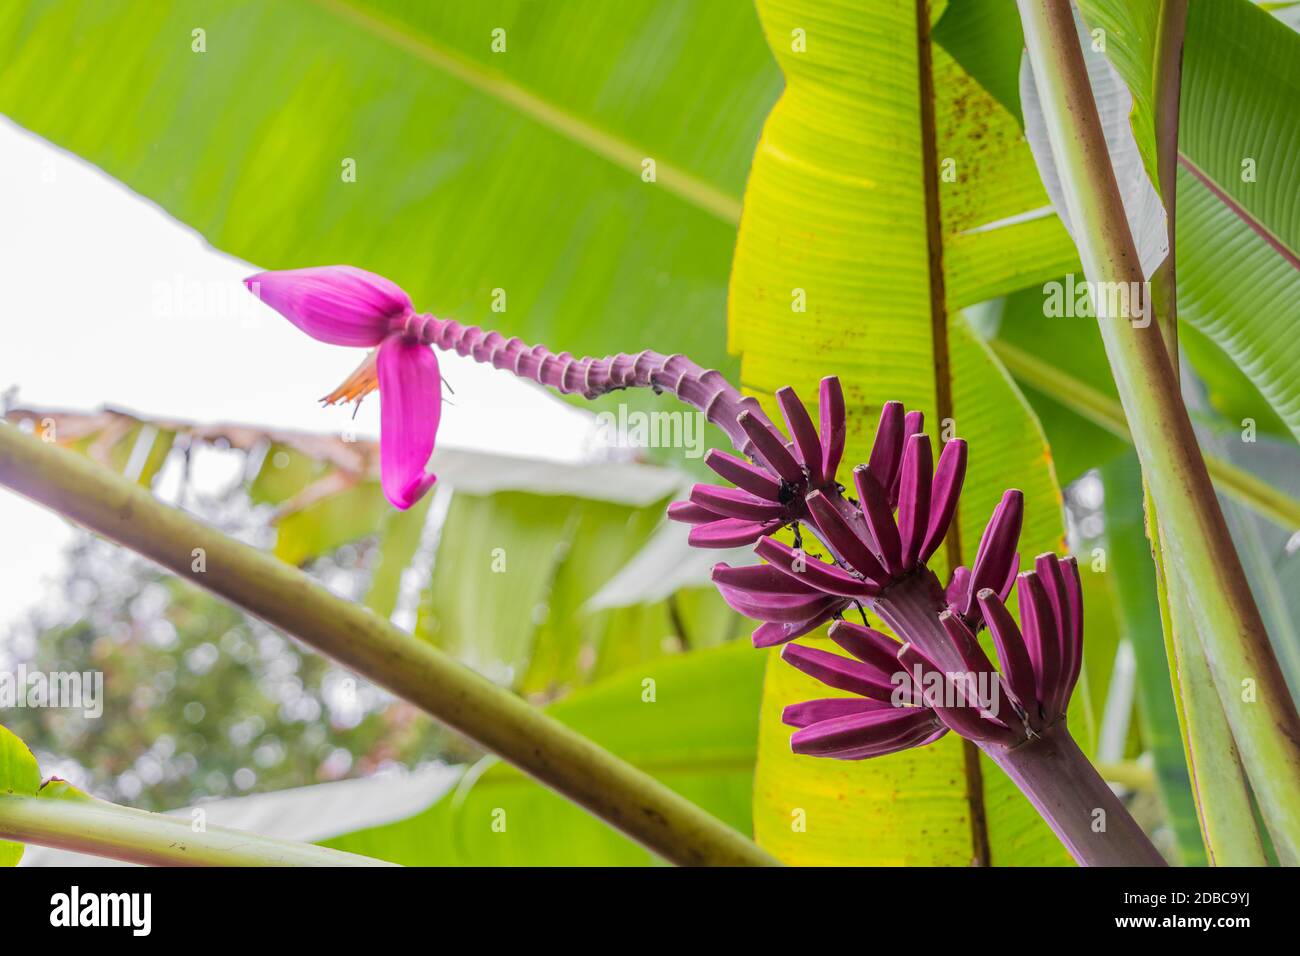 Purple or red banana plant heliconia flower from the tropical nature in Perdana Botanical Garden, Malaysia. Stock Photo